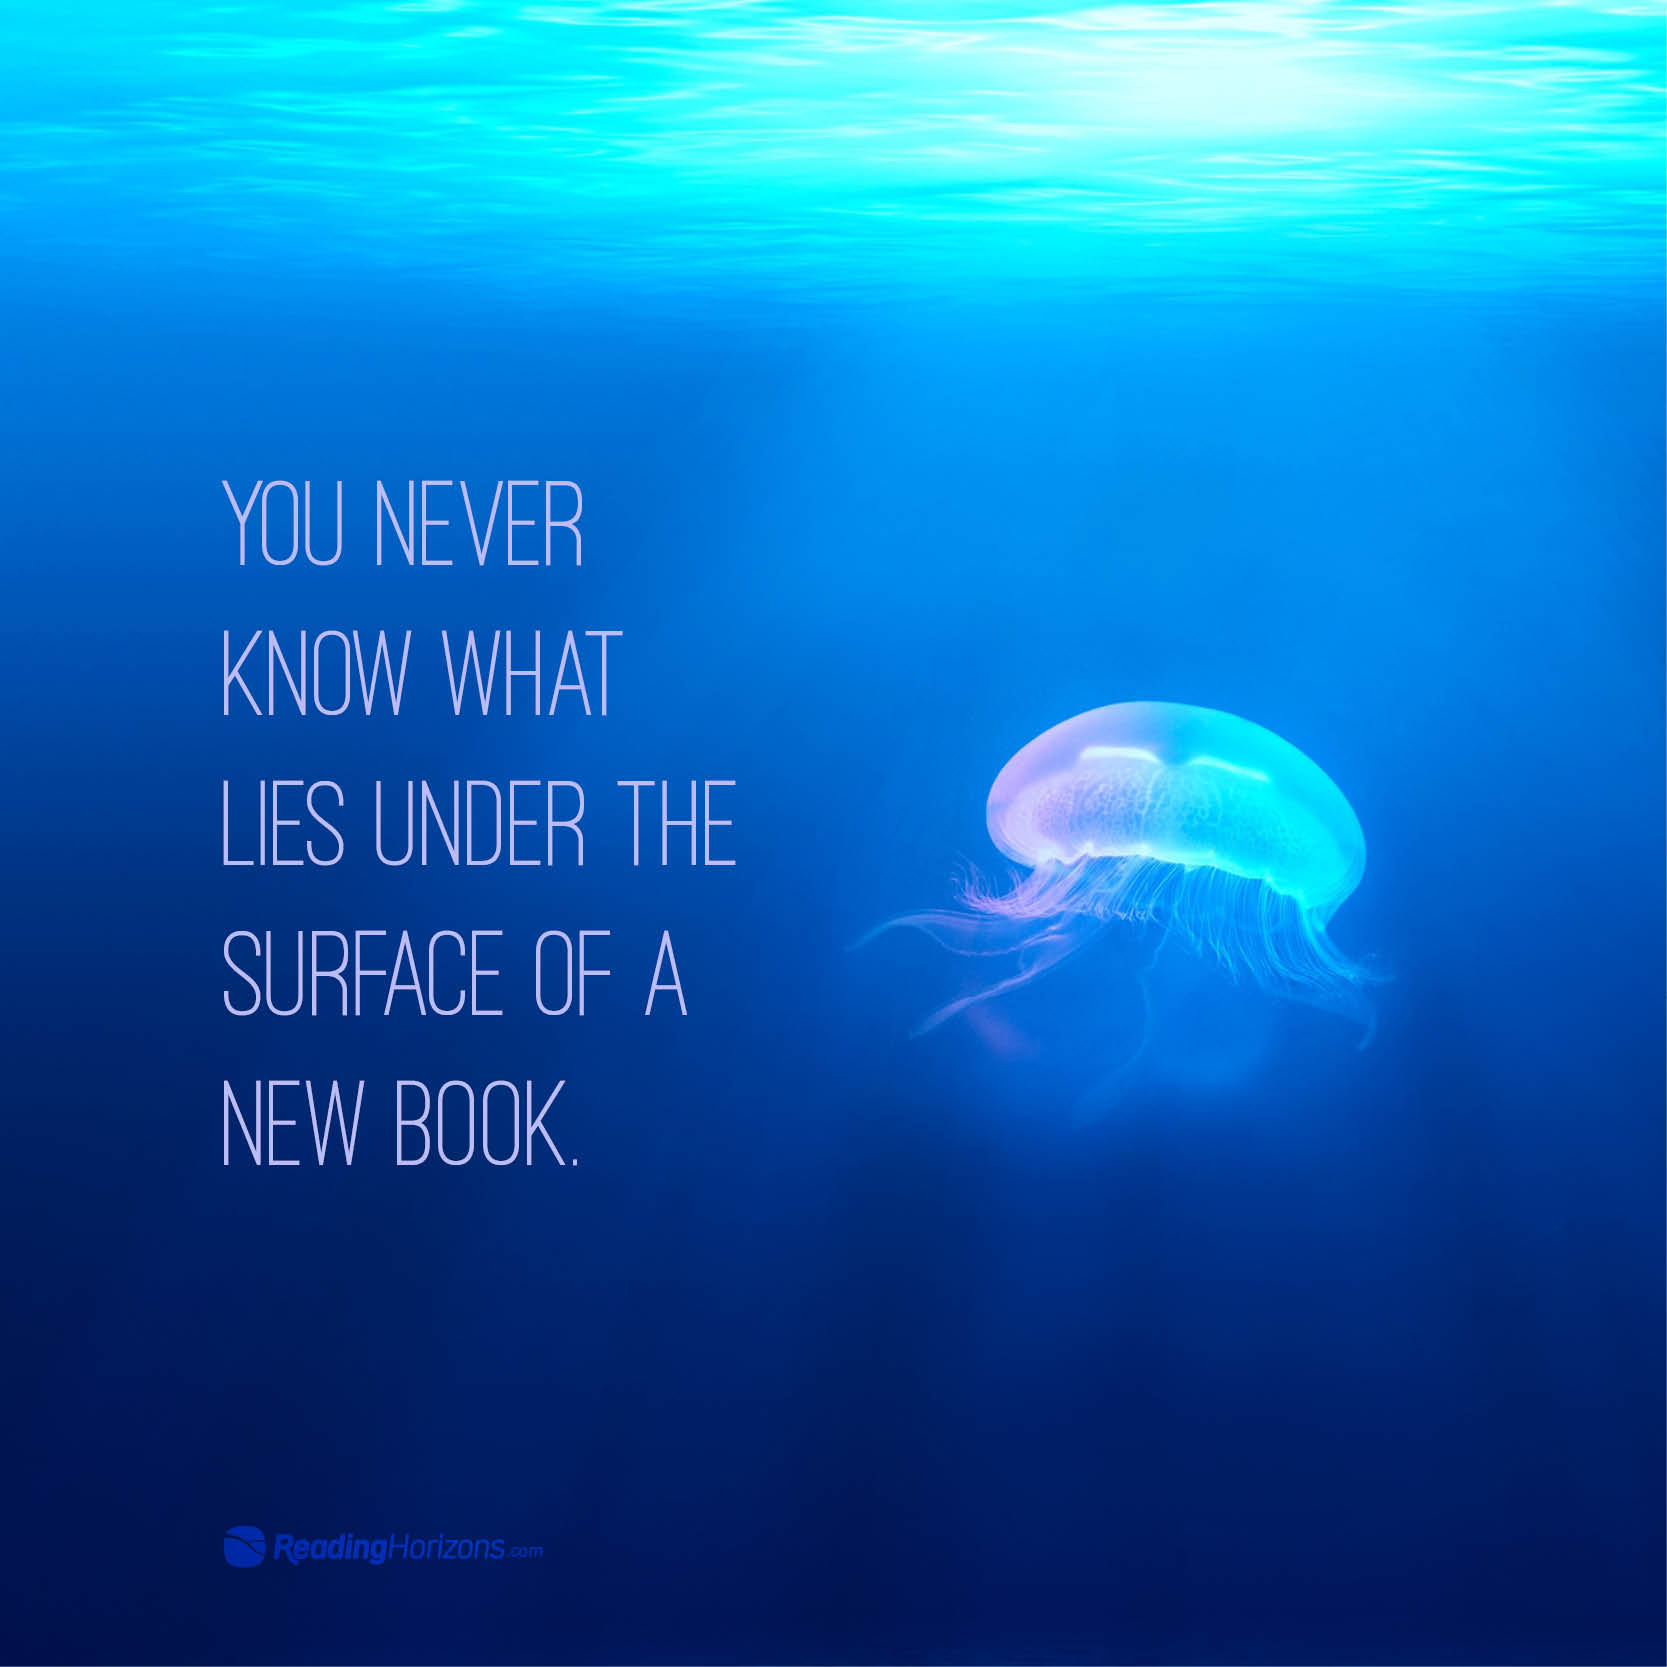 A meme of a jellyfish in the ocean with the words "You never know what lies under the surface of a new book."